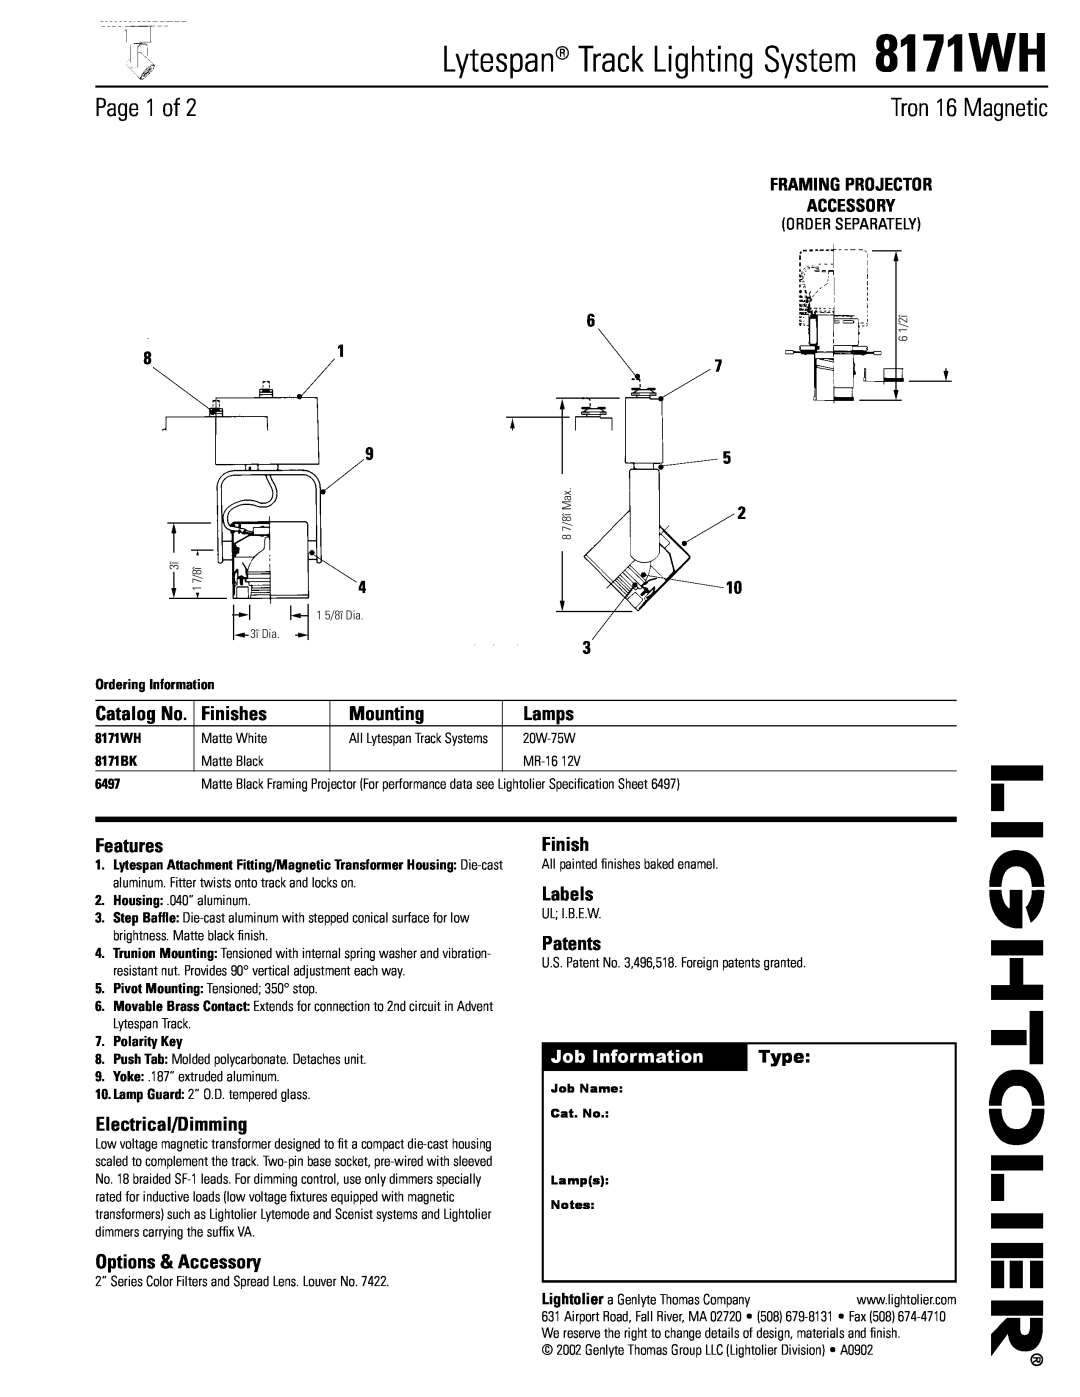 Lightolier specifications Lytespan Track Lighting System 8171WH, Page 1 of, Tron 16 Magnetic, Finishes, Mounting, Lamps 